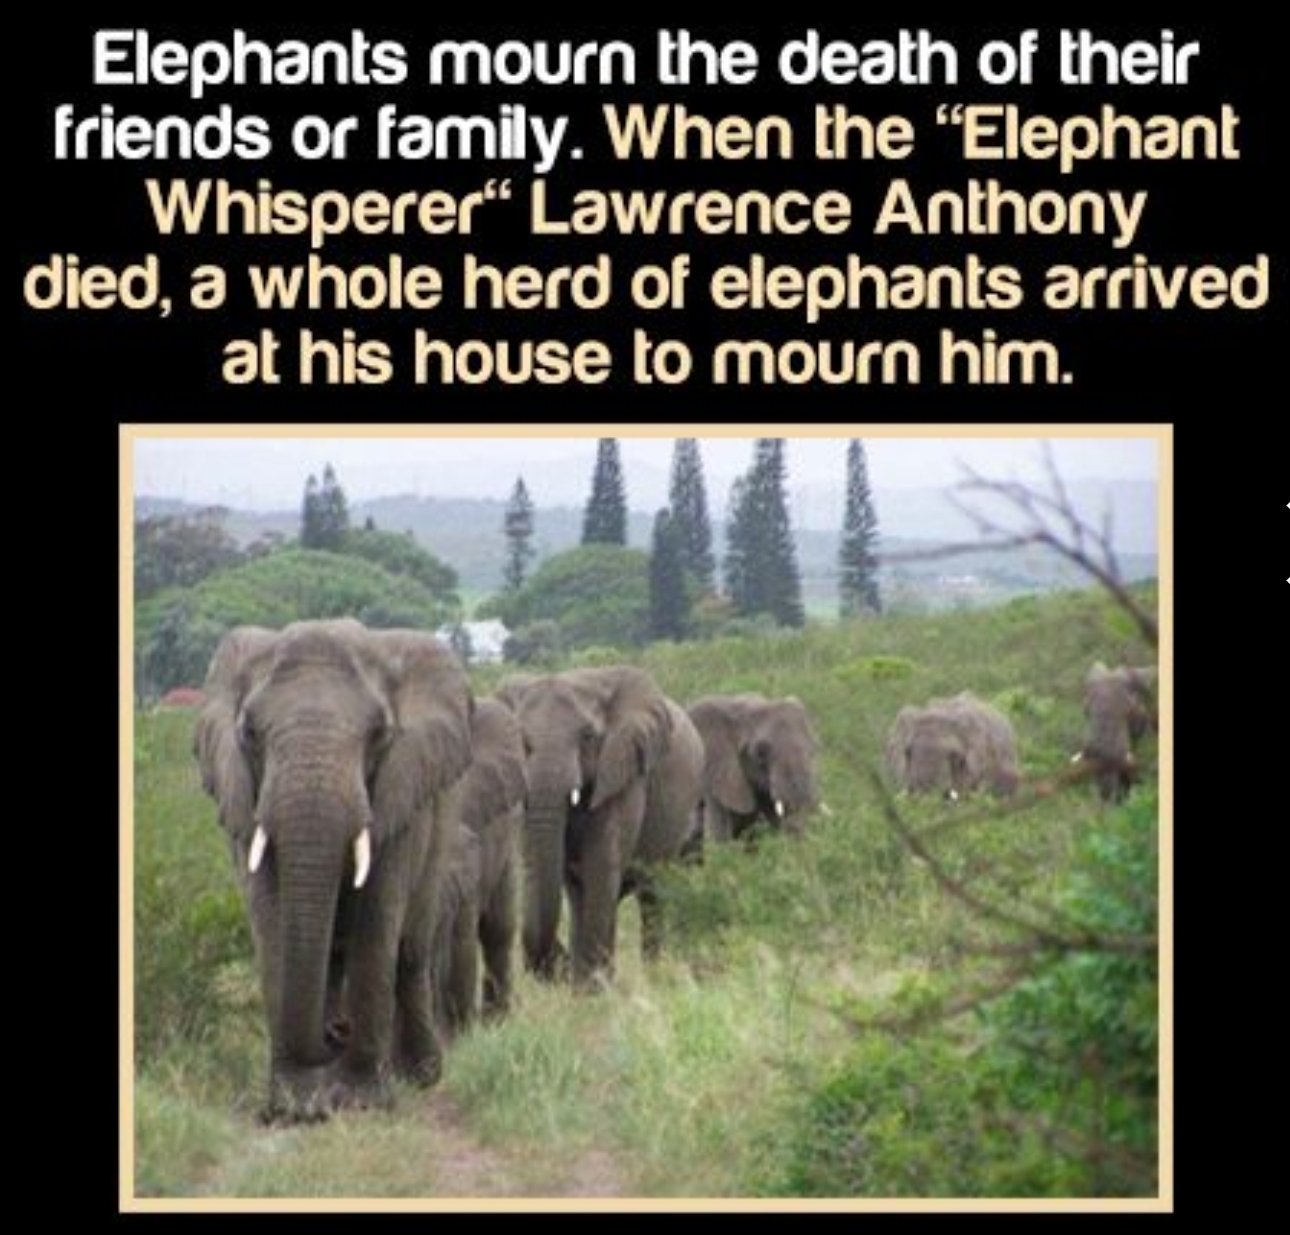 What did elephants do when Lawrence died?